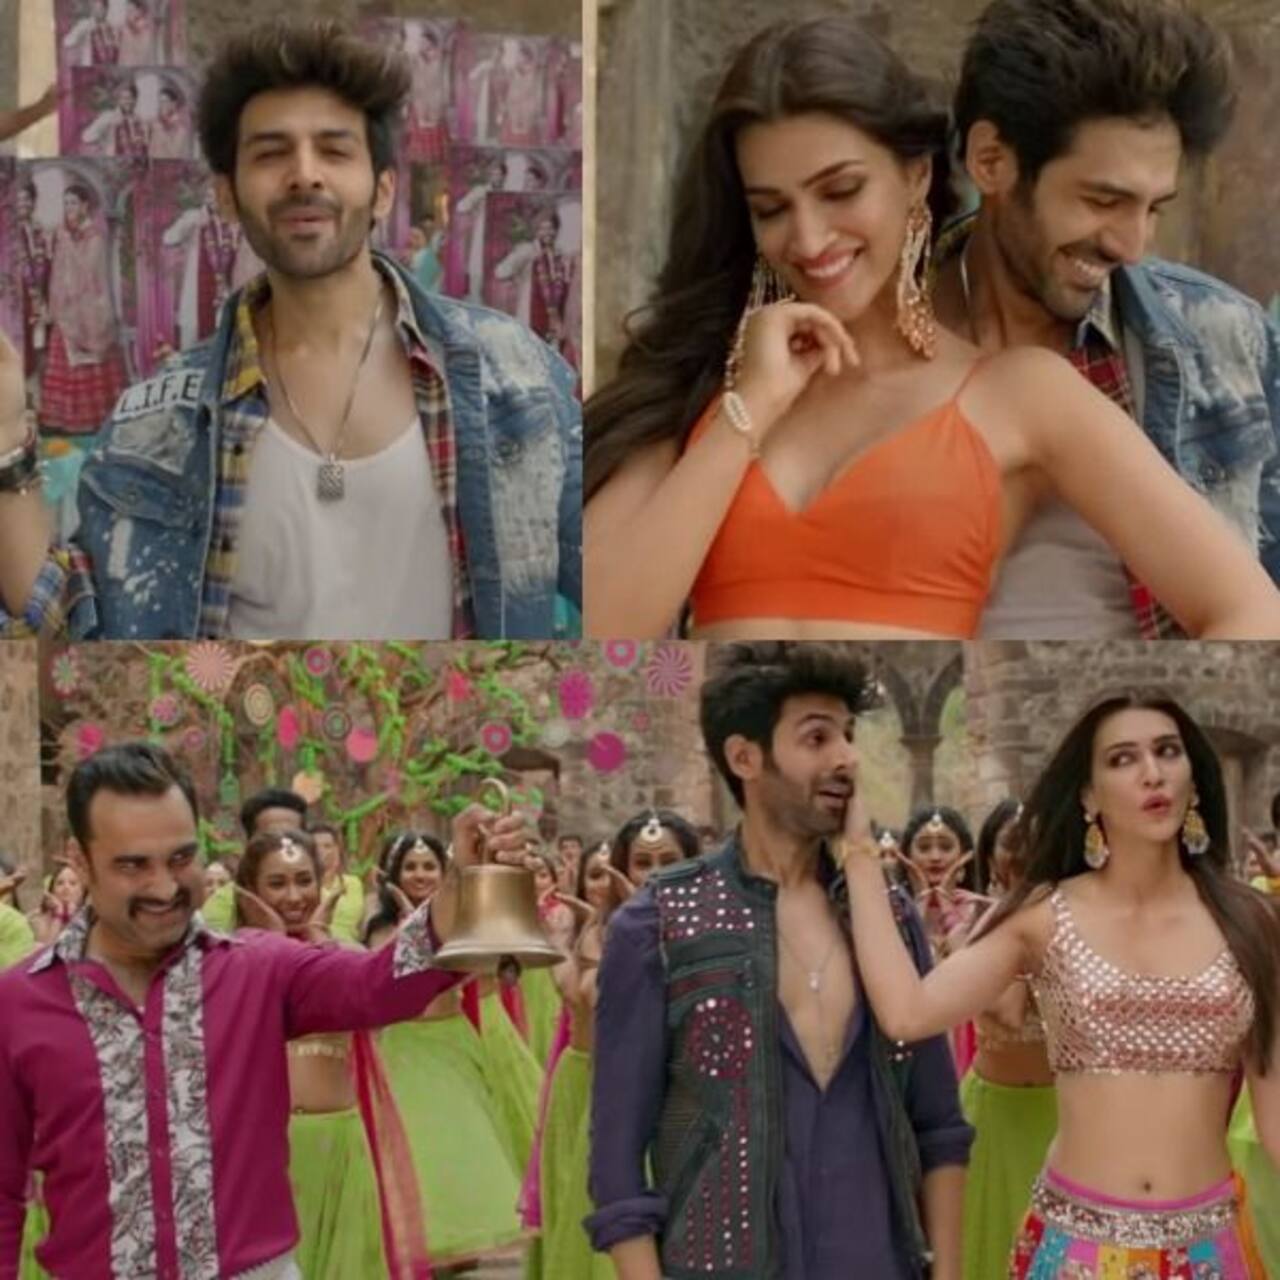 Luka Chuppi song Poster Lagwa Do: Kartik Aaryan and Kriti Sanon try to revive the 90s but fail - watch video